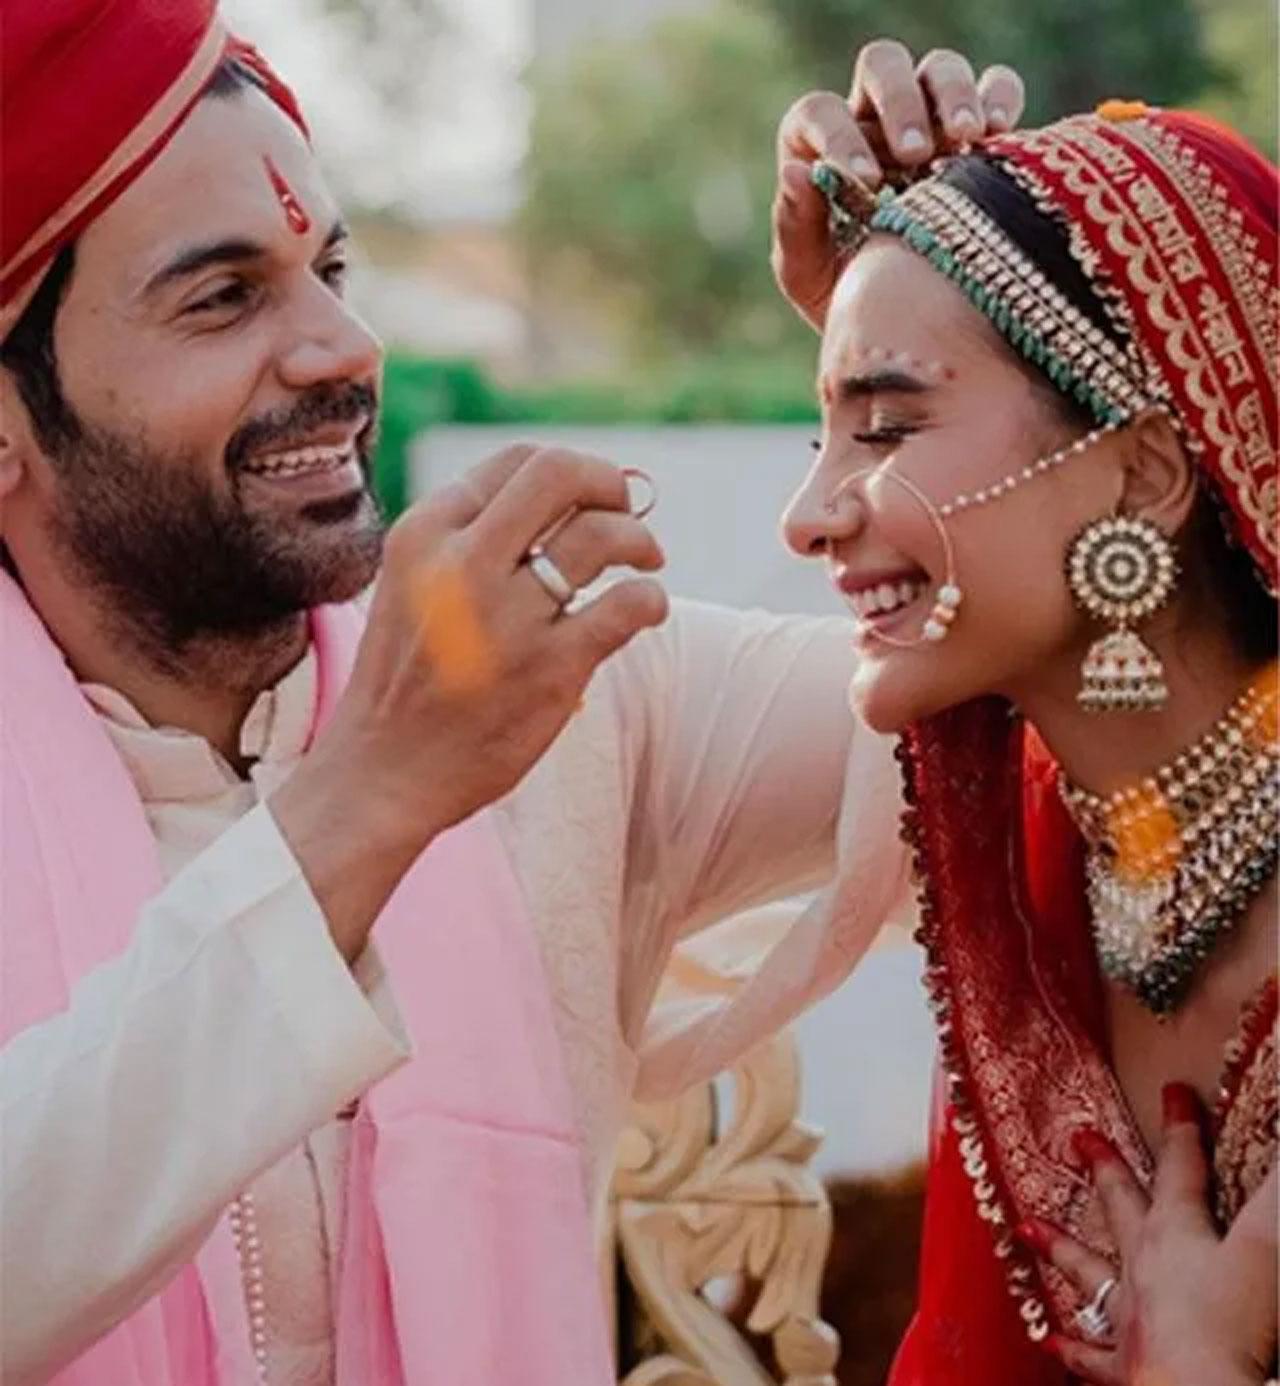 This beautiful couple got married after 10 years of togetherness. They met each other in 2010 and ever since then, have been going strong and just got stronger after getting married. They were also living-in together. (Picture Courtesy: Rajkummar Rao's Official Instagram Account)